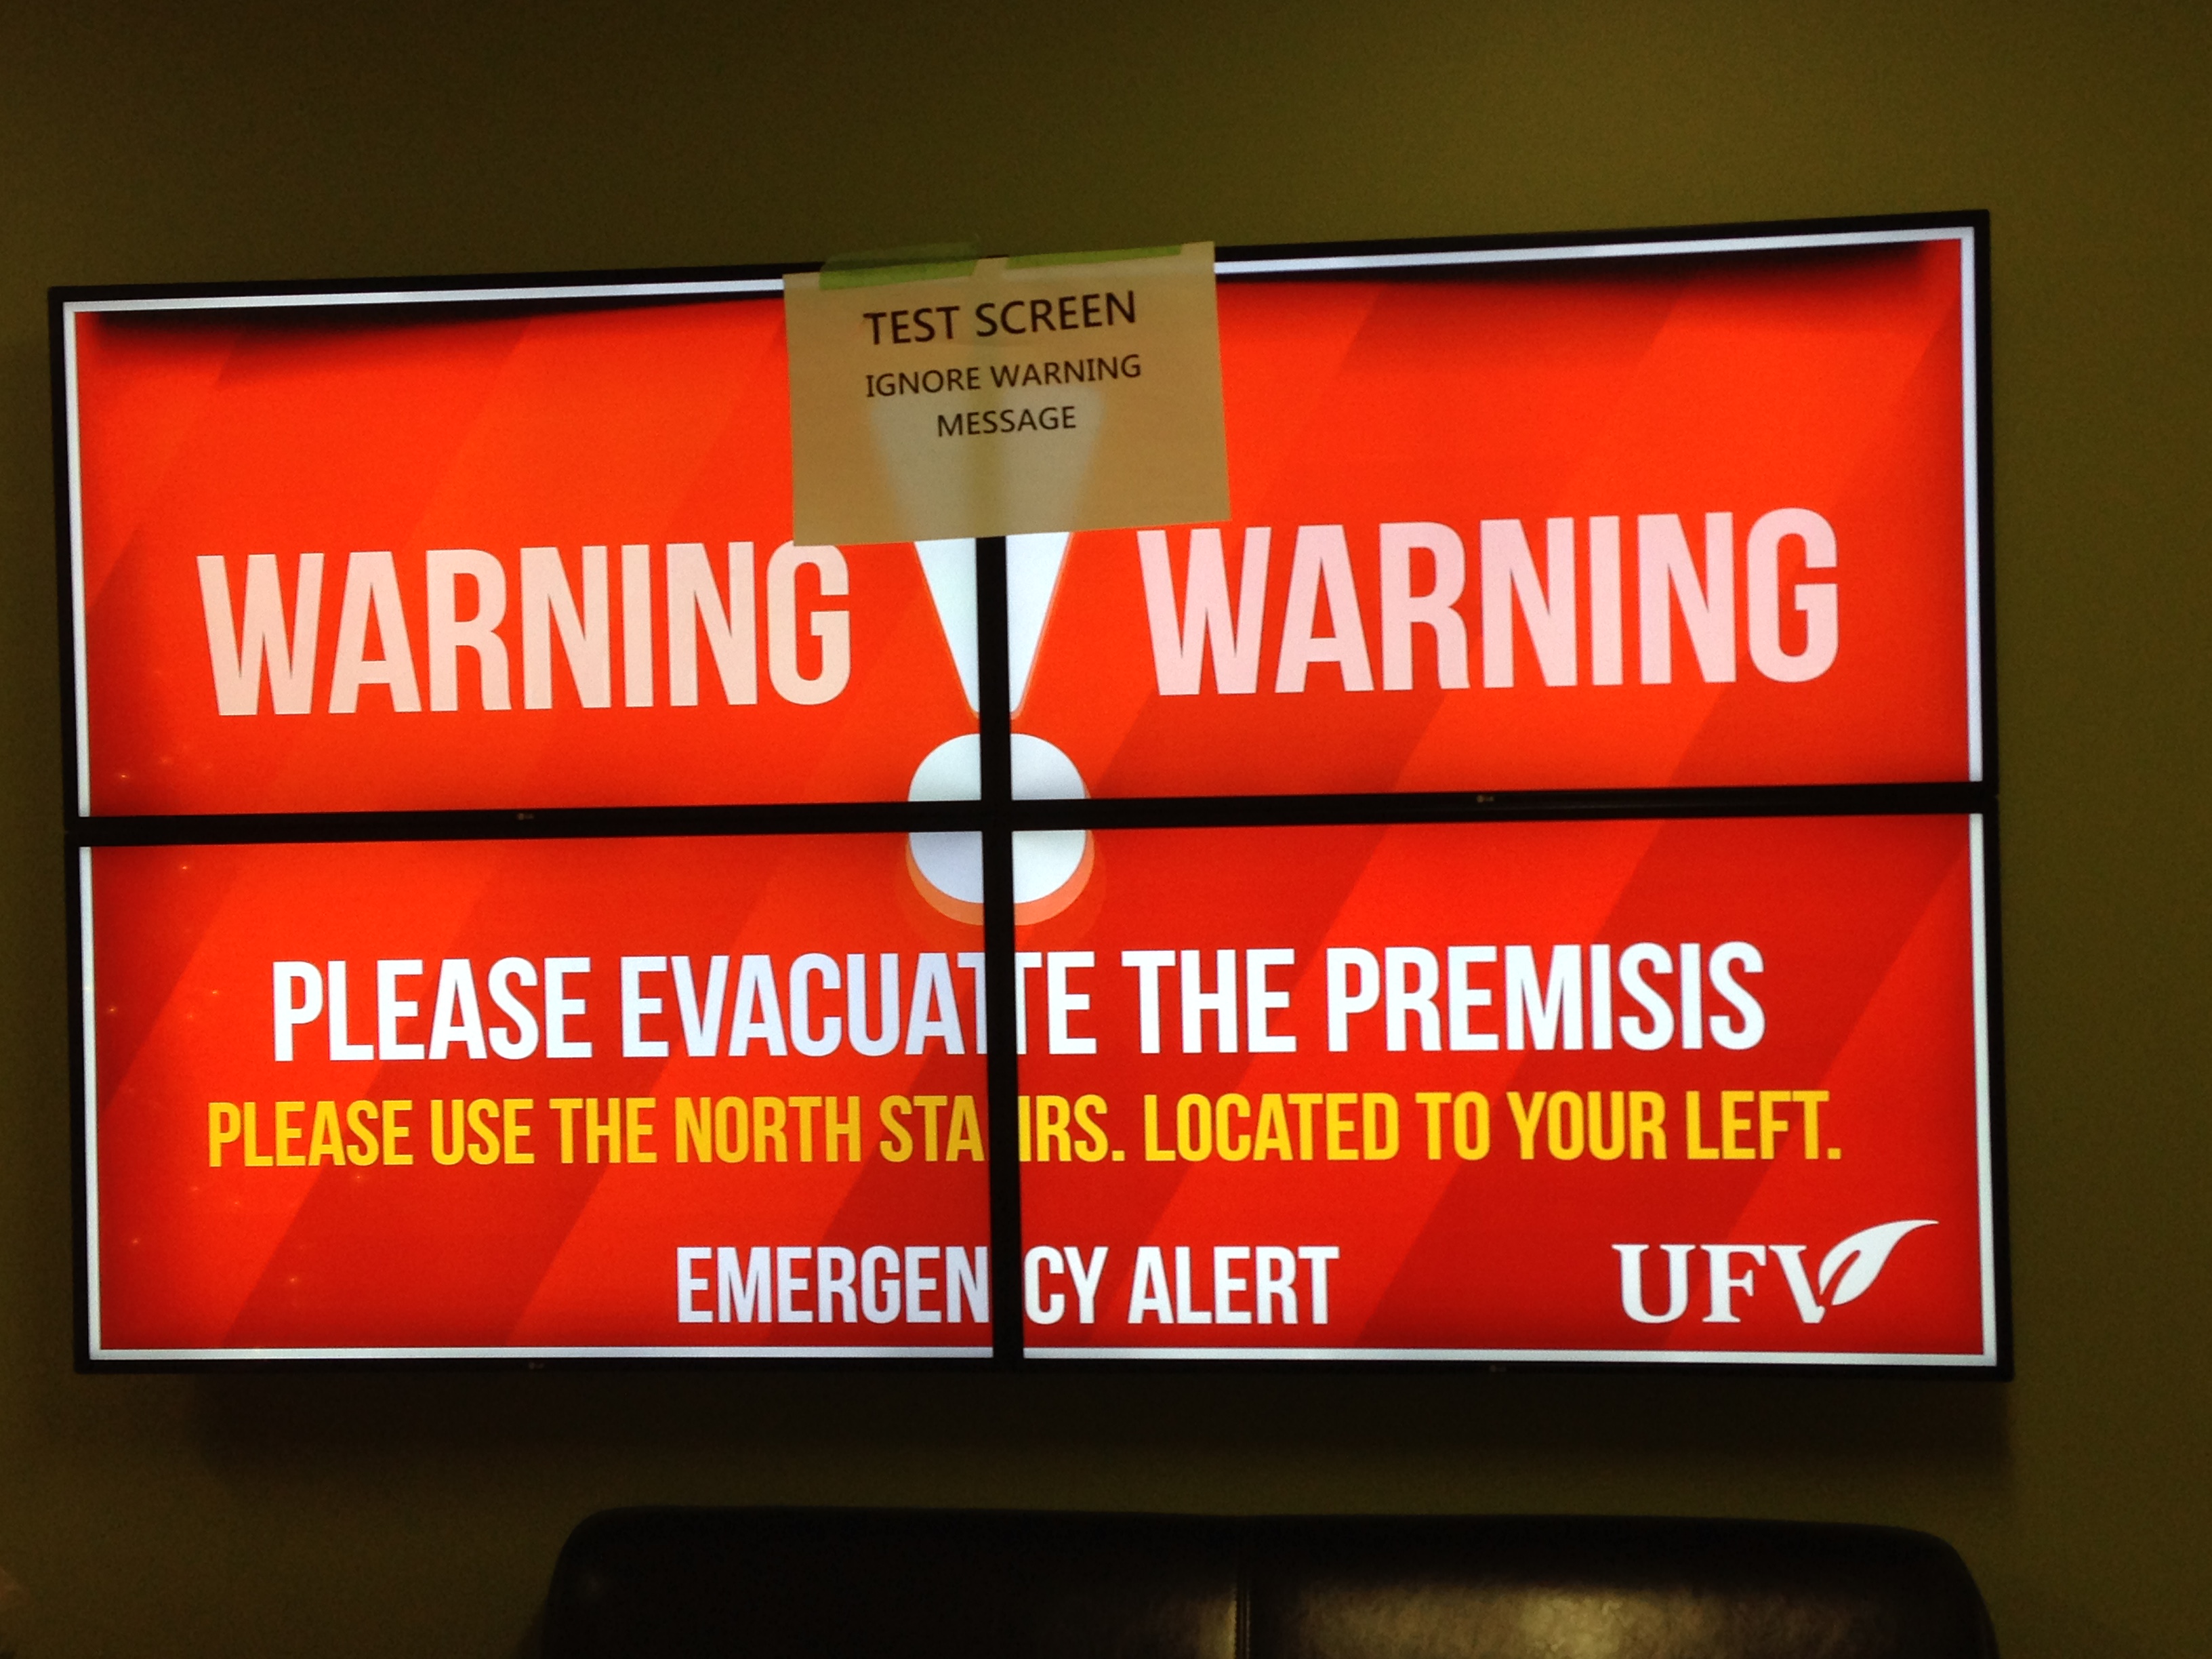 Please stand by: emergency broadcast  notifications may come soon to university screens